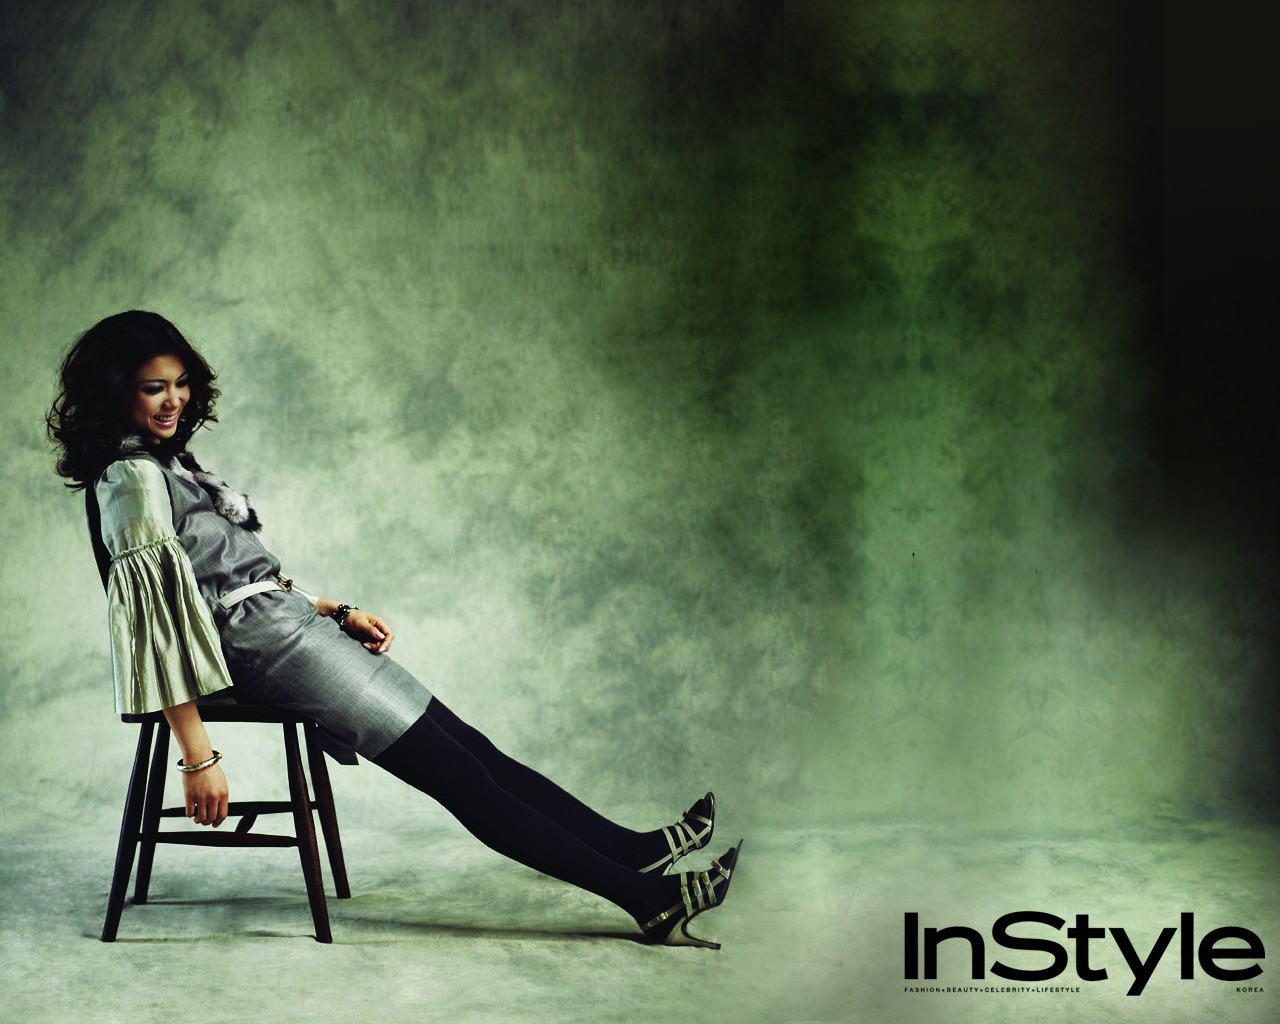 South Korea Instyle Cover Model #38 - 1280x1024